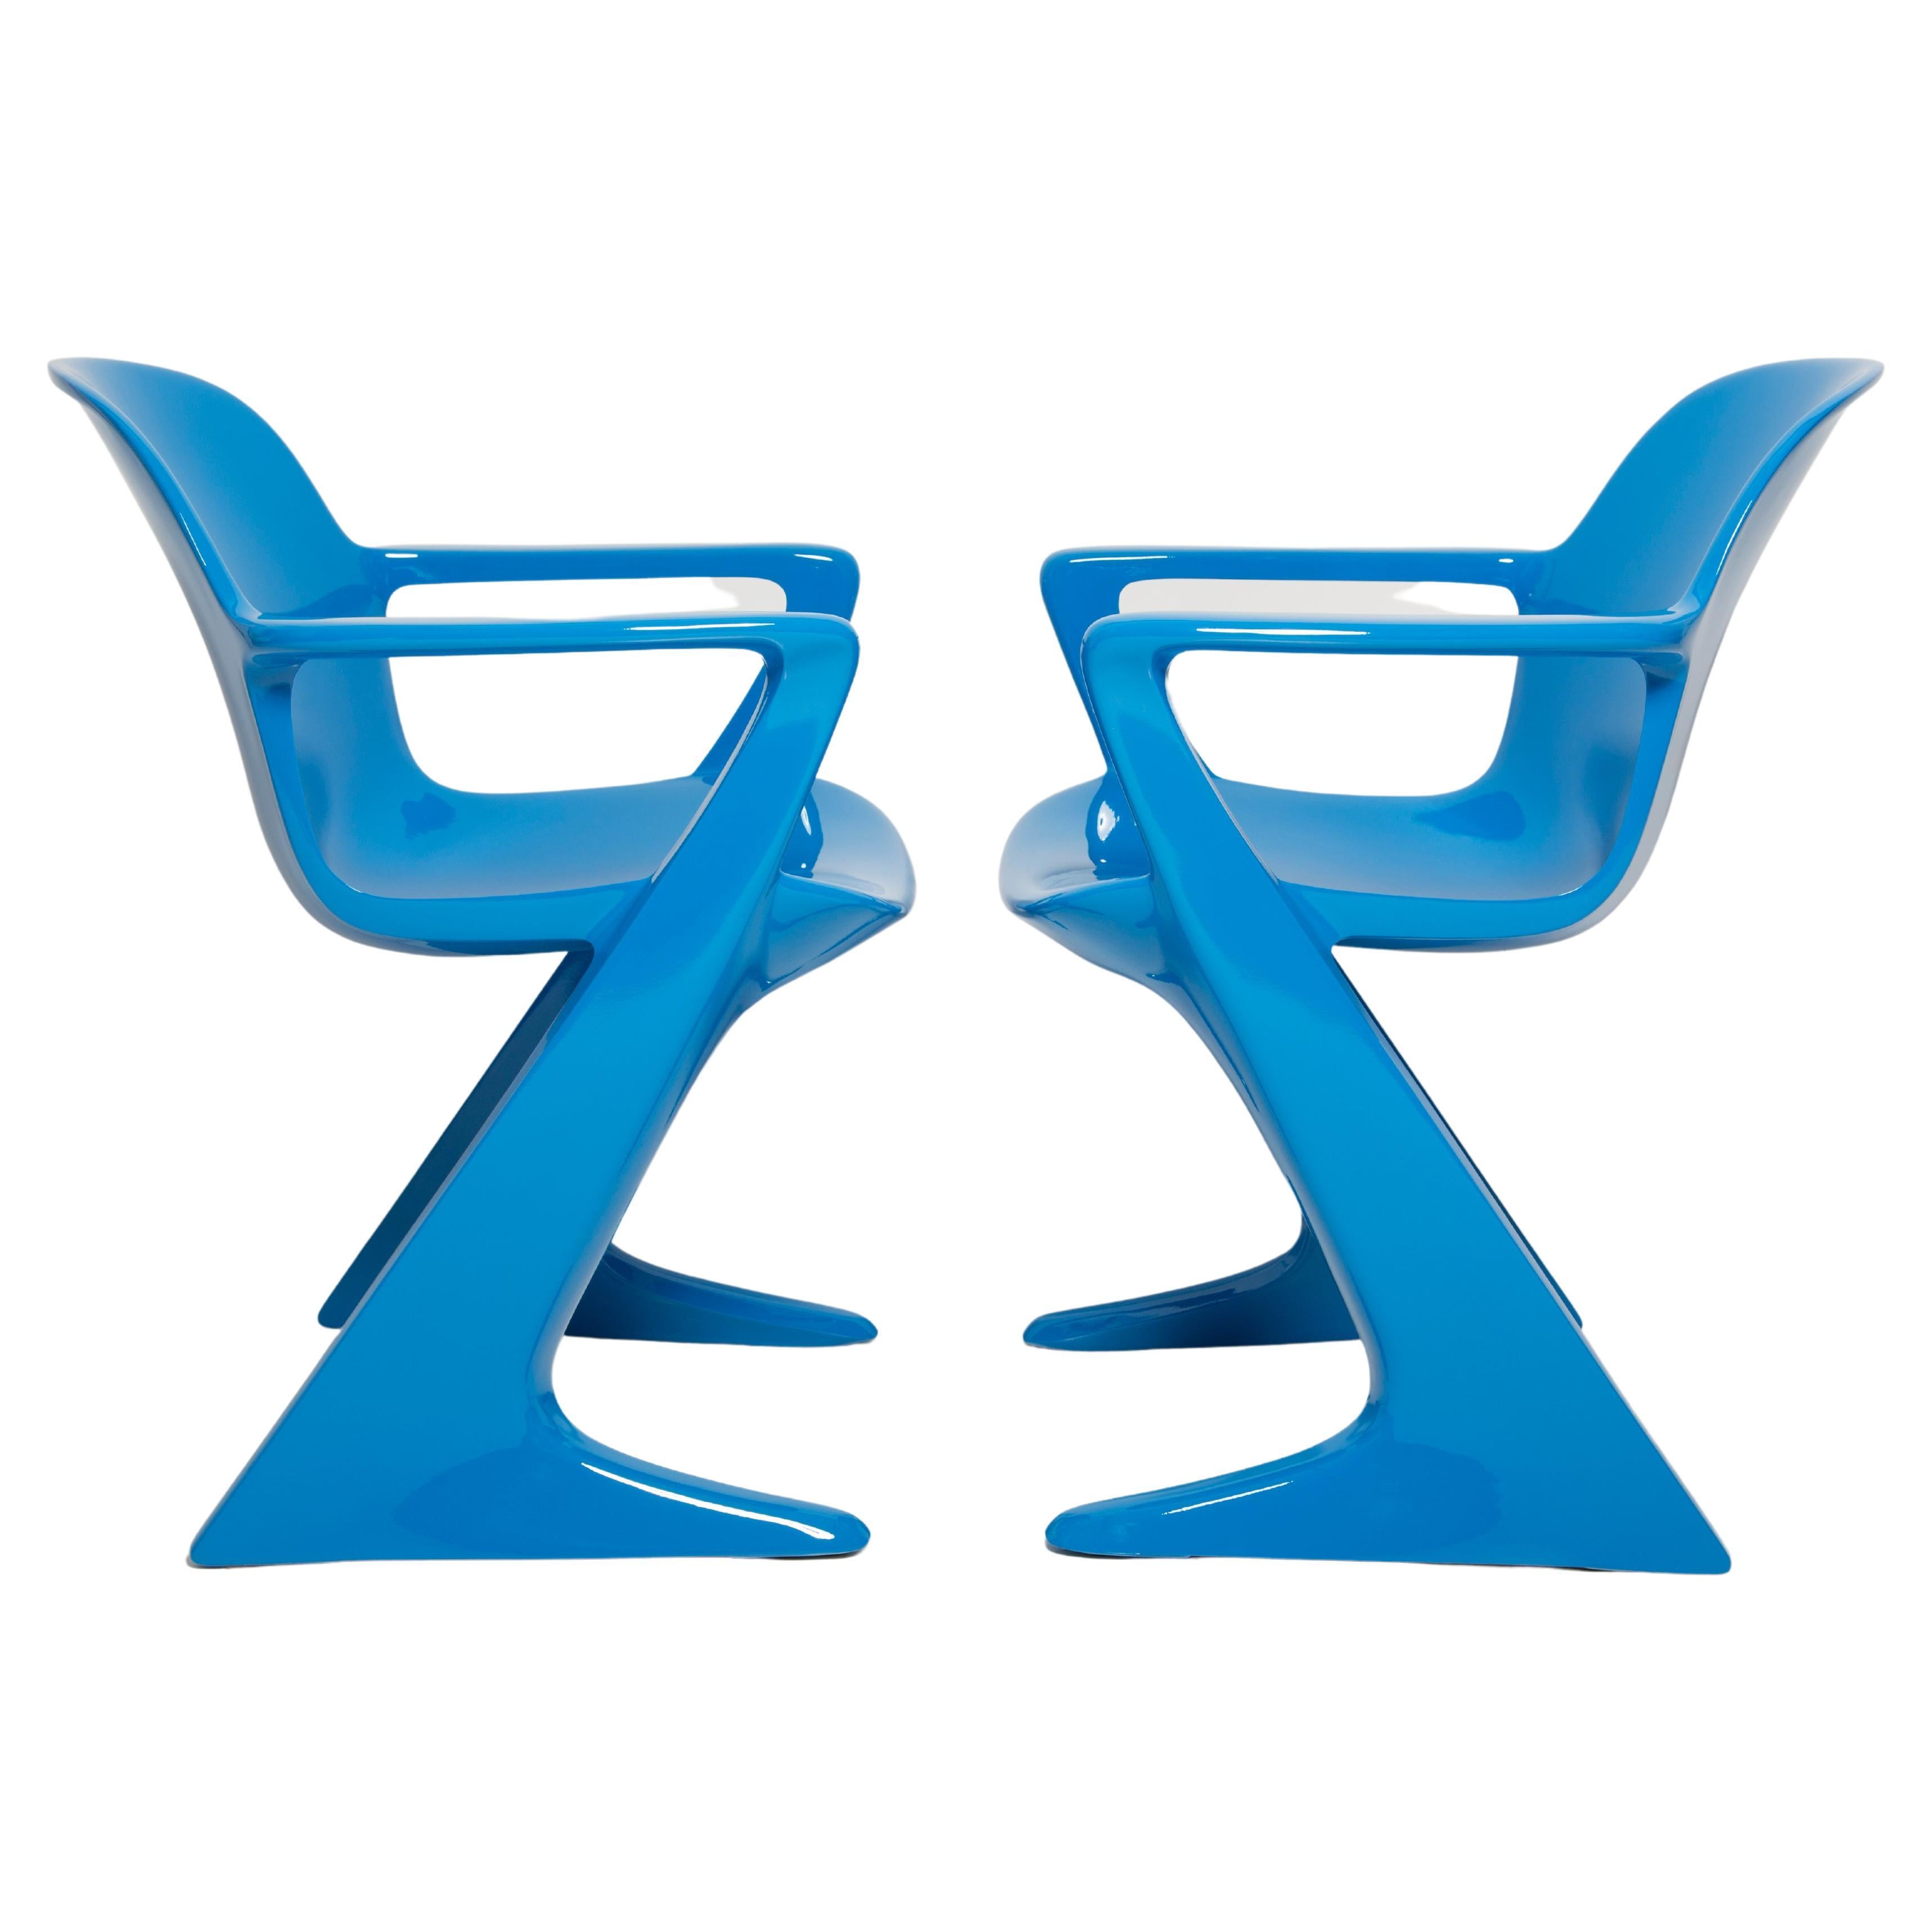 Set of Two Blue Kangaroo Chairs Designed by Ernst Moeckl, Germany, 1968 For Sale